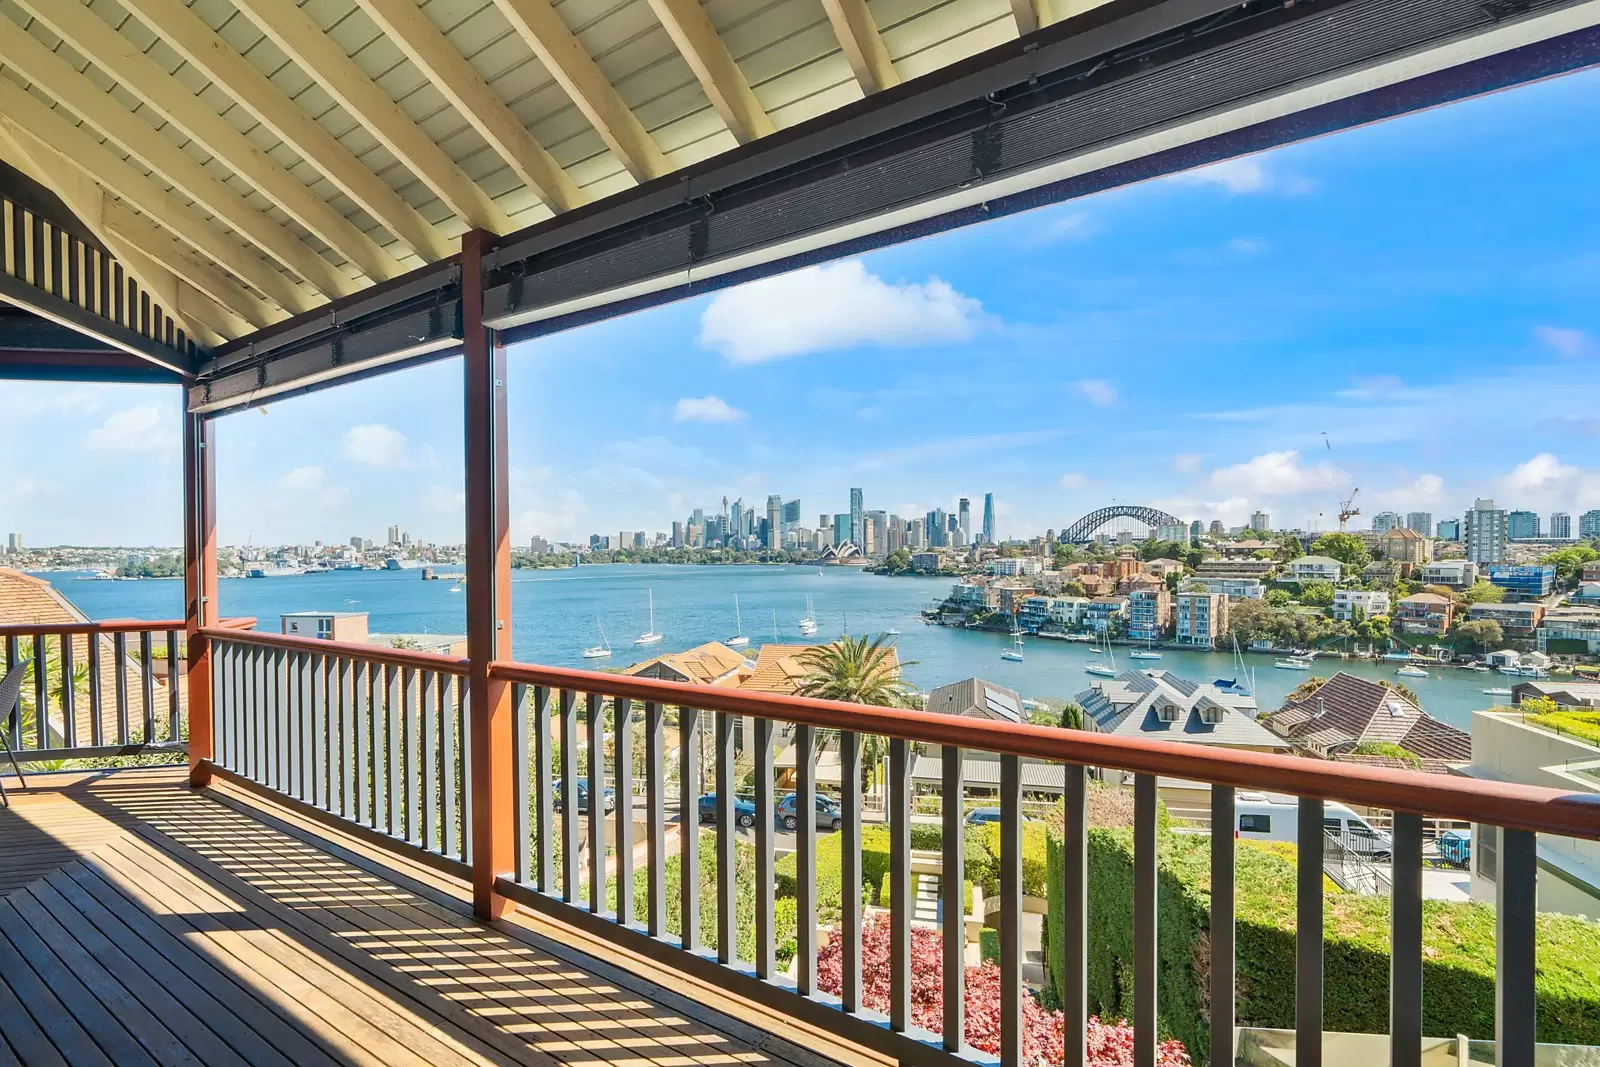 Photo #8: 29 Milson Road, Cremorne Point - Sold by Sydney Sotheby's International Realty